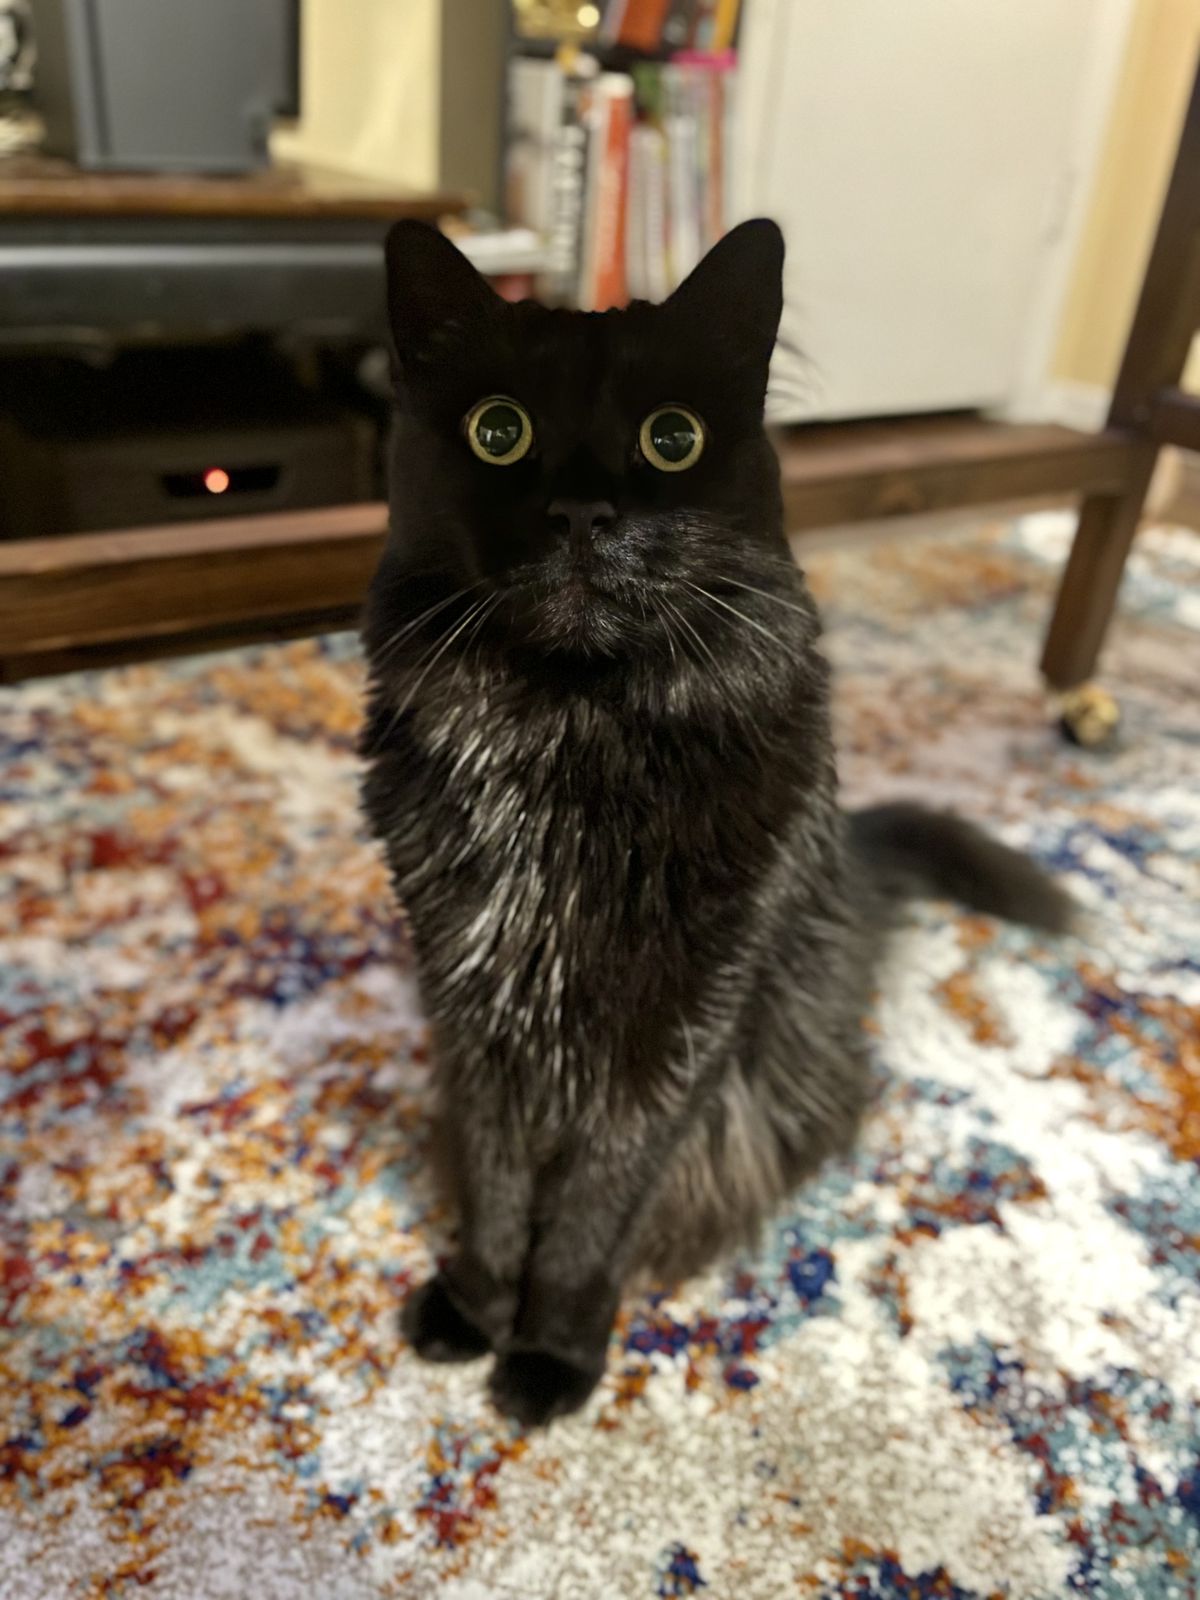 A black cat standing in a living room with a carpet on the floor.